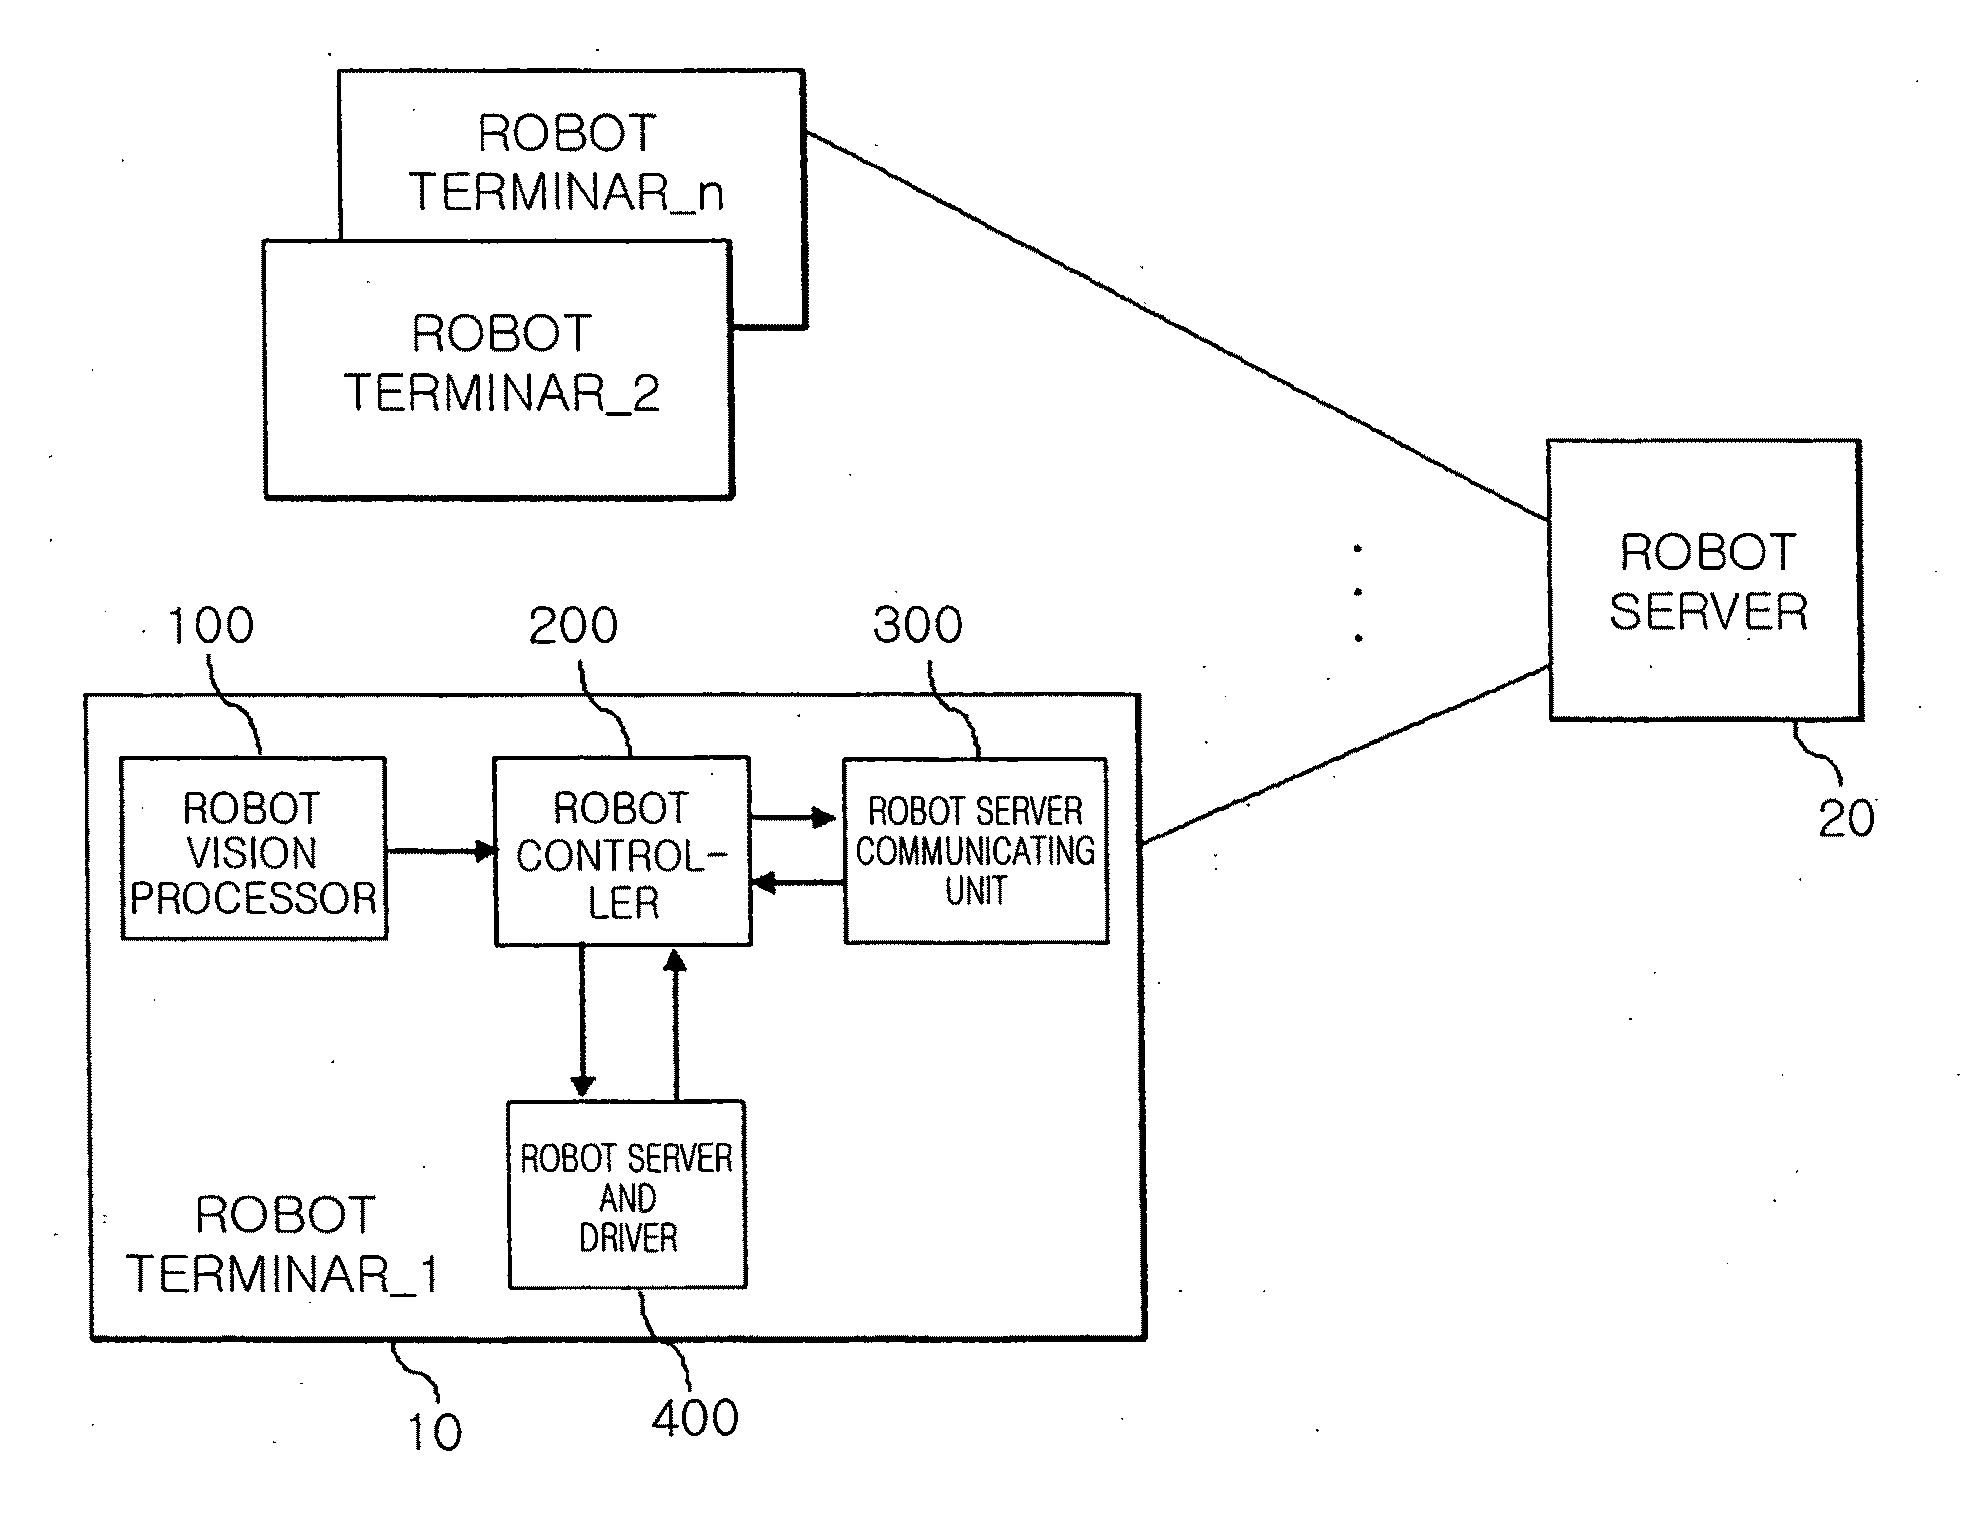 Apparatus and method for effectively transmitting image through stereo vision processing in intelligent service robot system